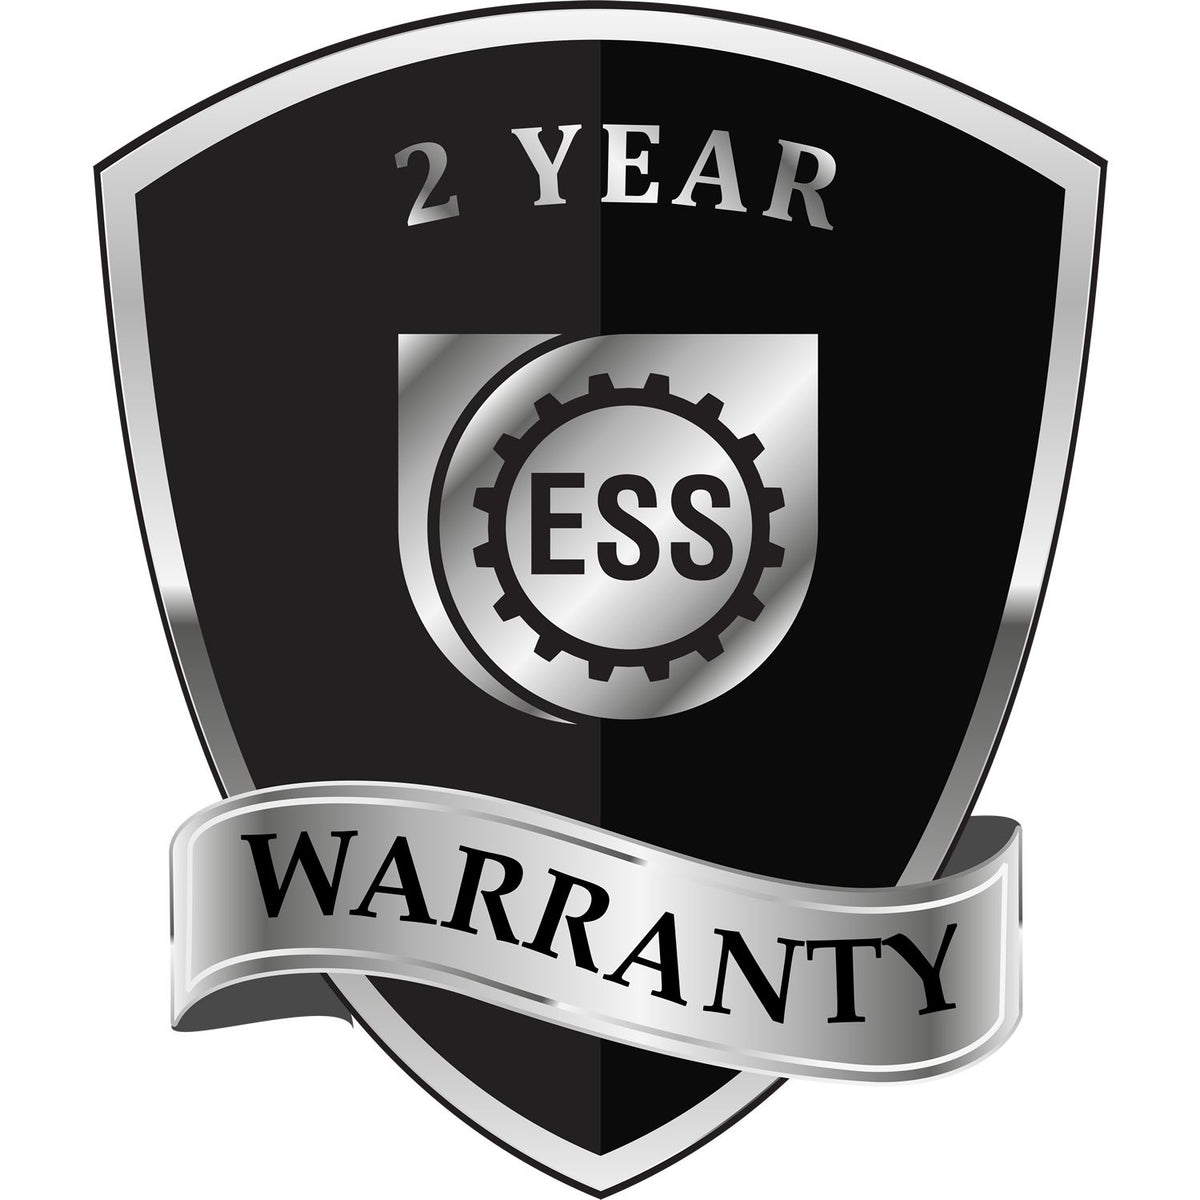 A badge or emblem showing a warranty icon for the Handheld Nevada Land Surveyor Seal